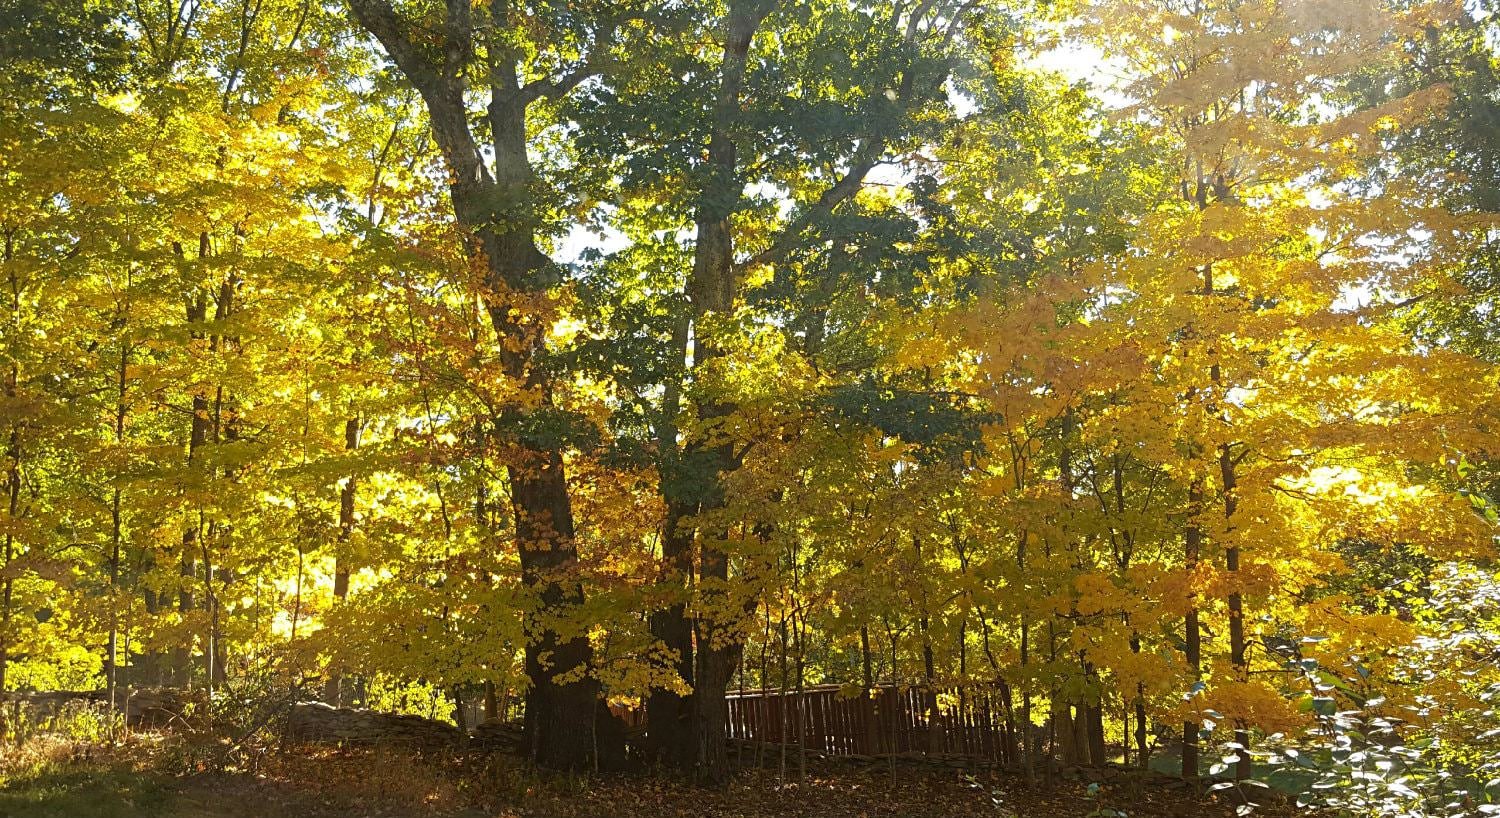 View of the woods with trees in the autumn displaying green, yellow and orange leaves